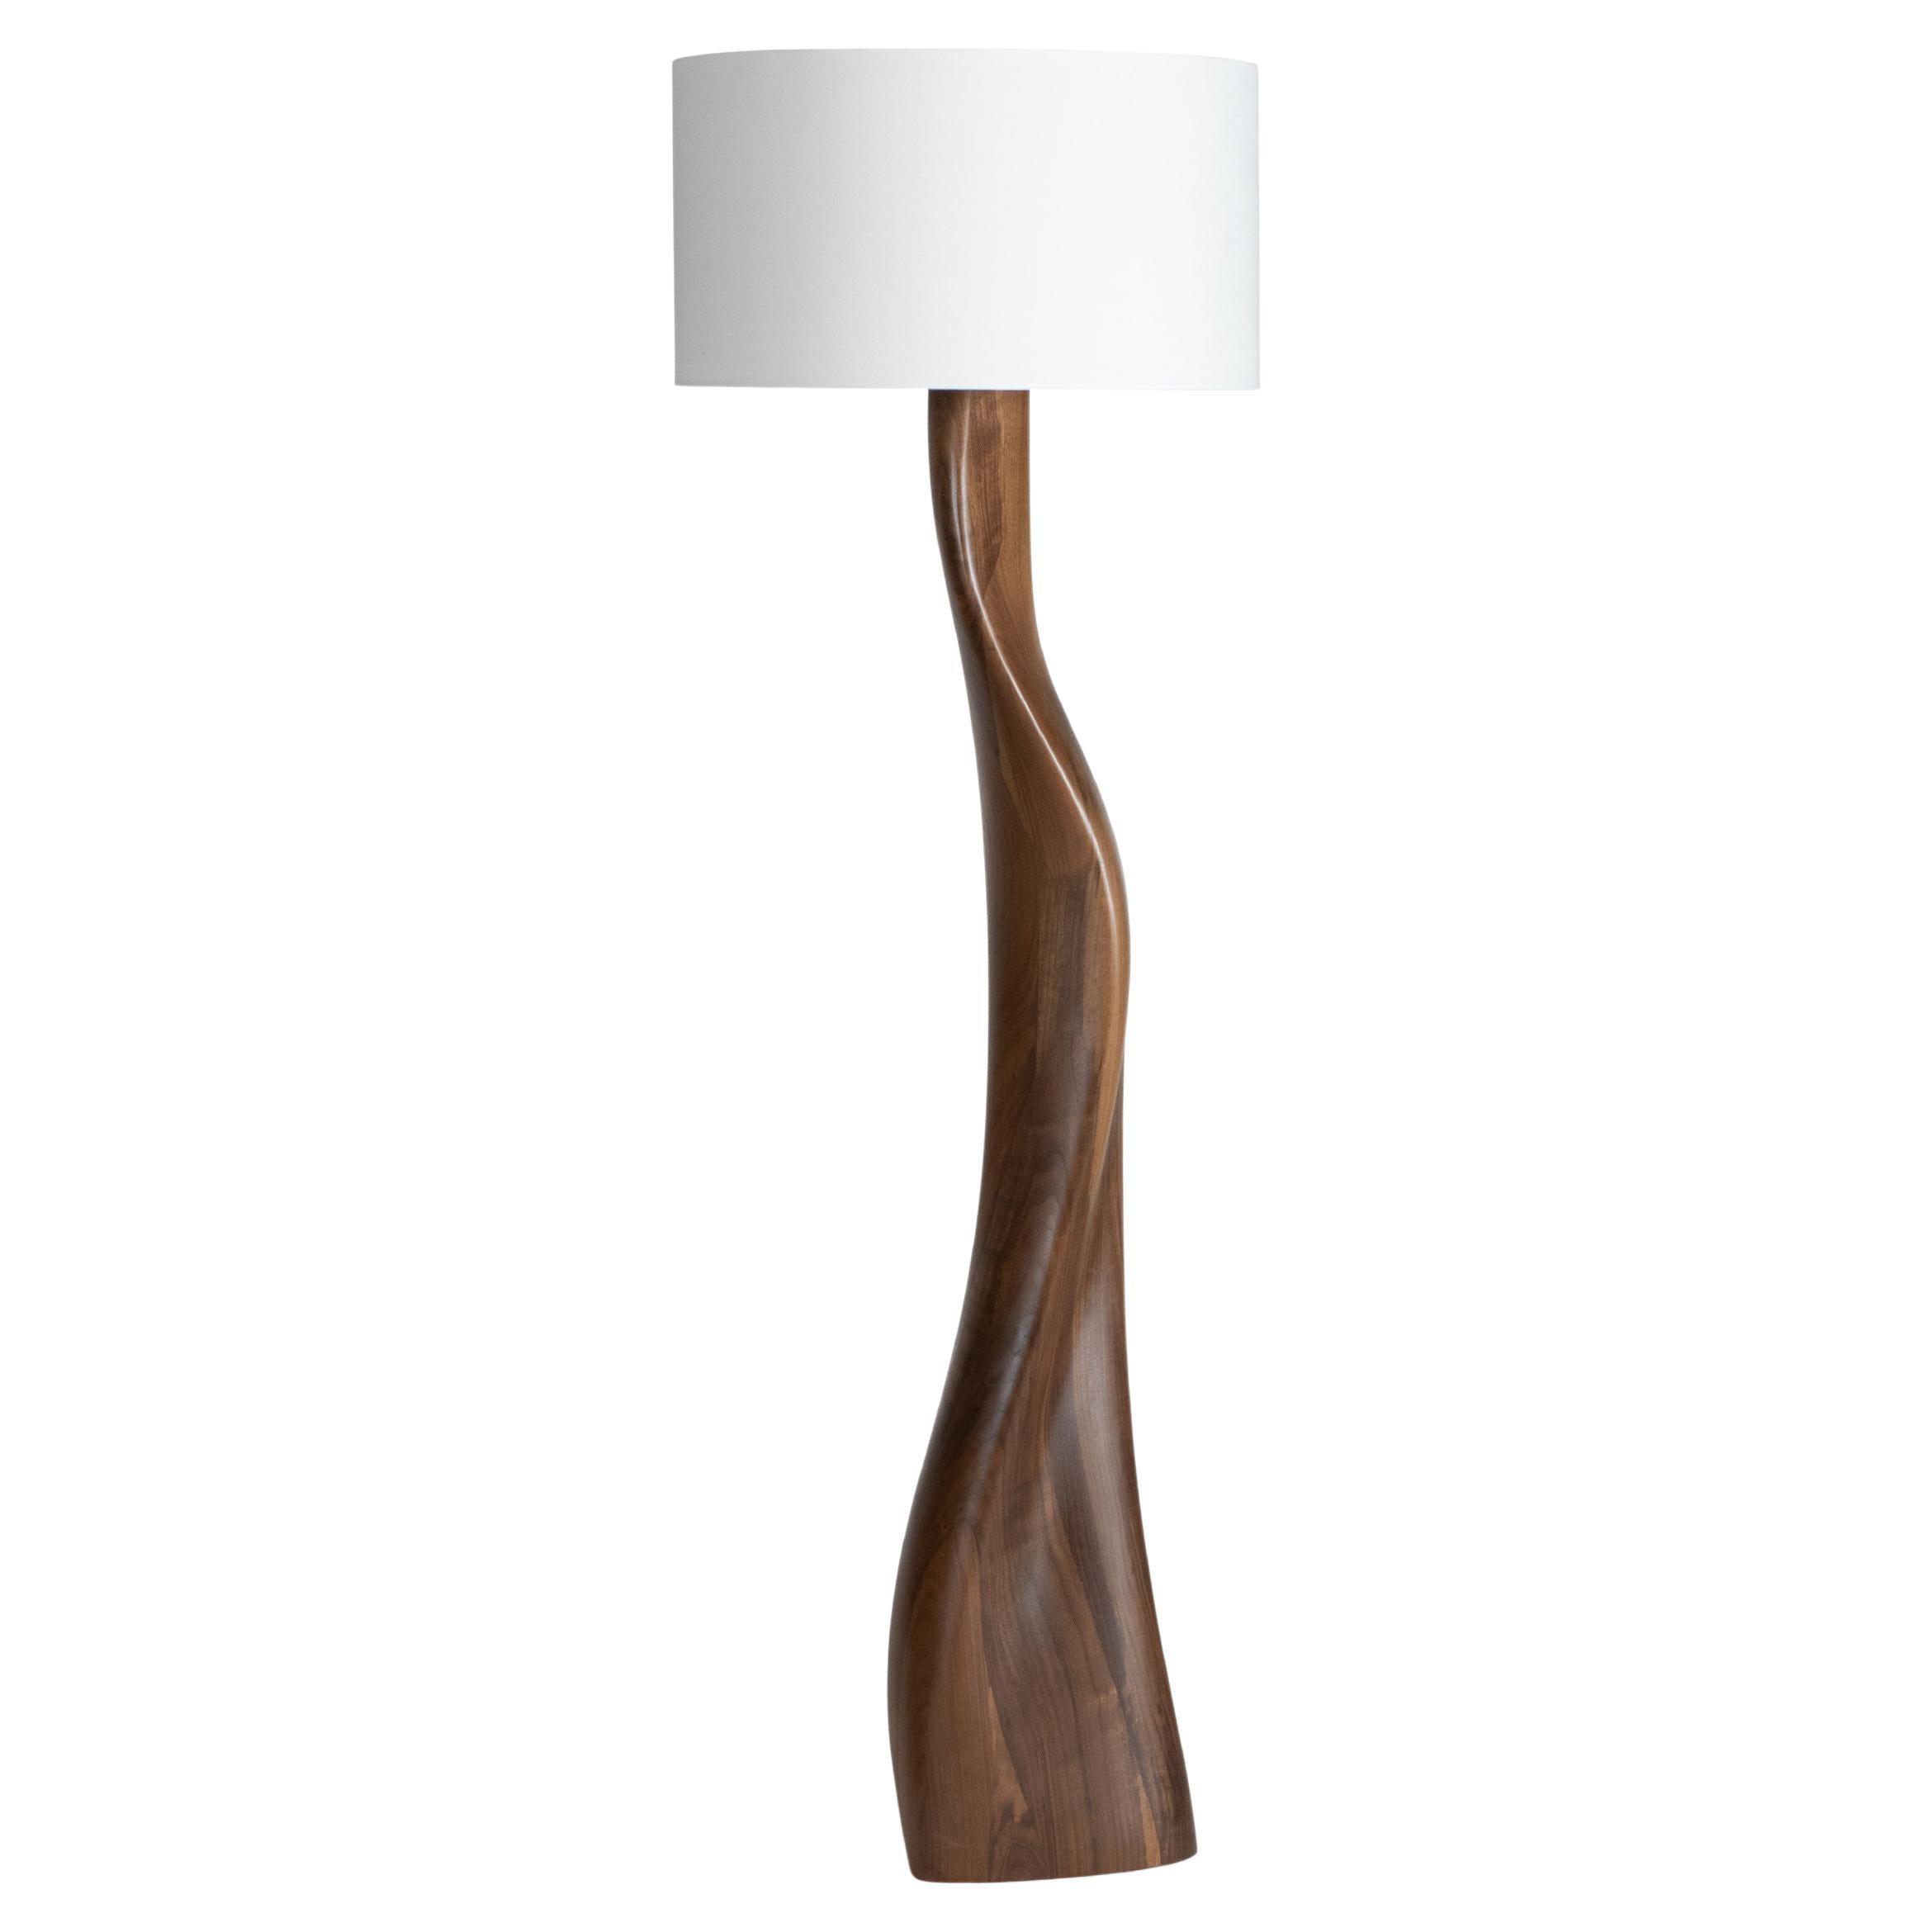 Amorph Roman floor lamp in Walnut wood with Natural stain and Ivory silk shade For Sale